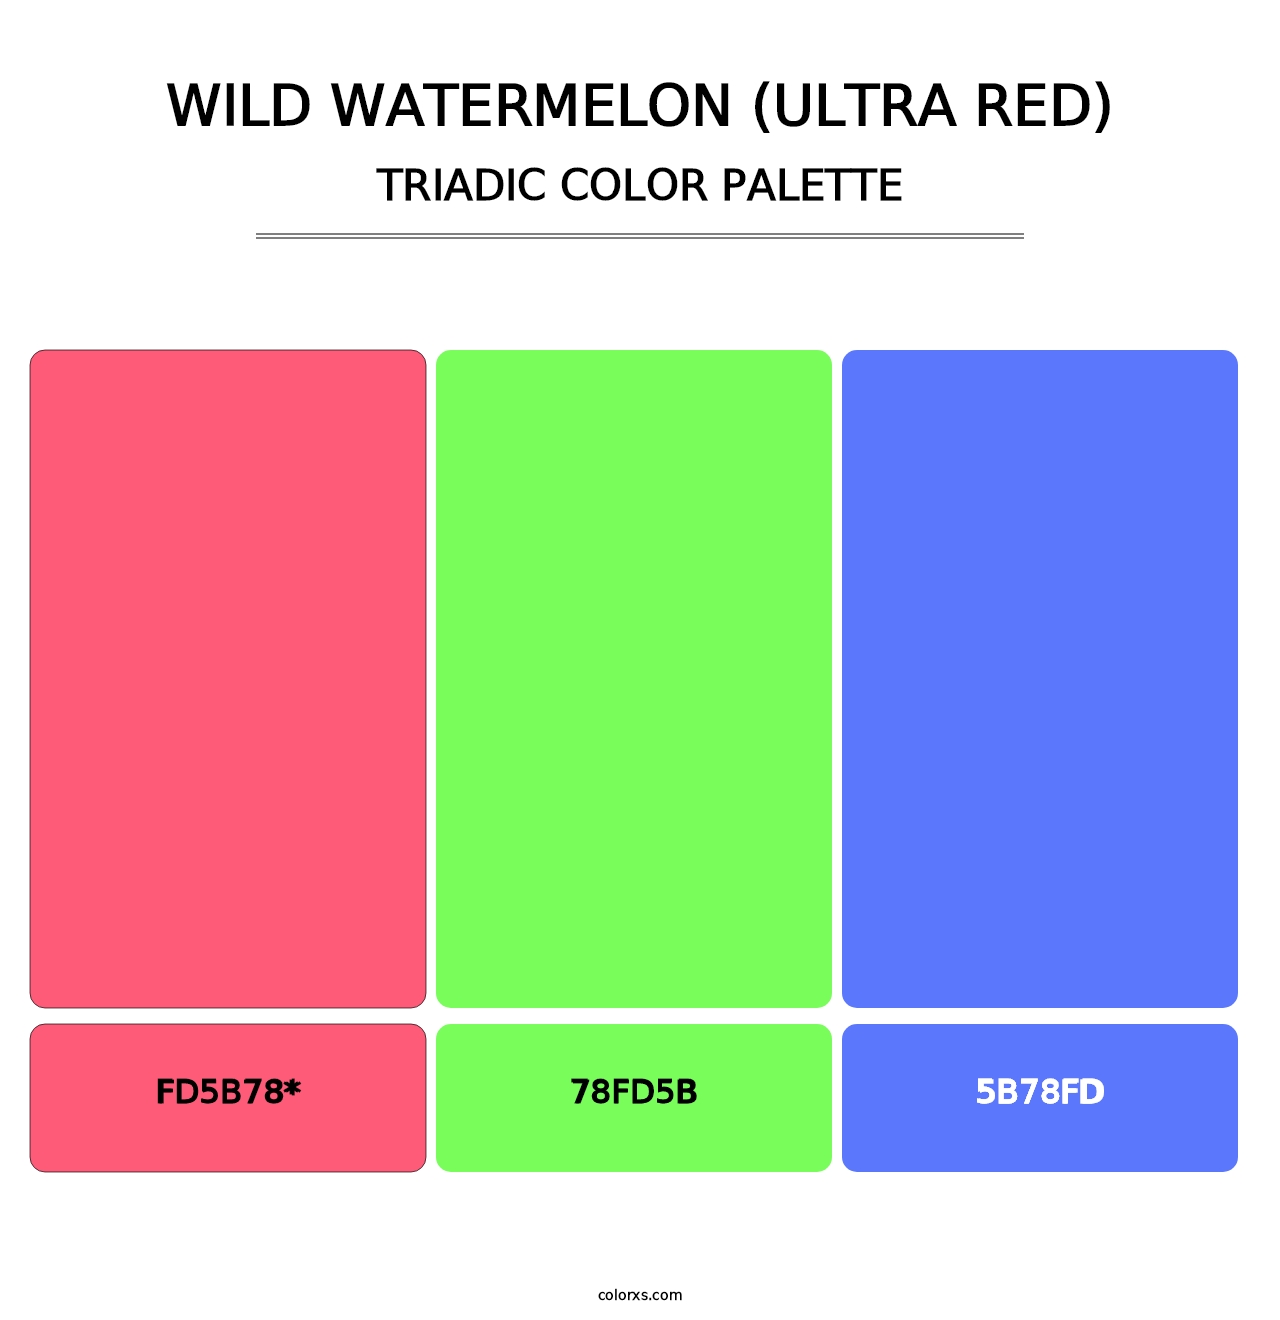 Wild Watermelon (Ultra Red) - Triadic Color Palette